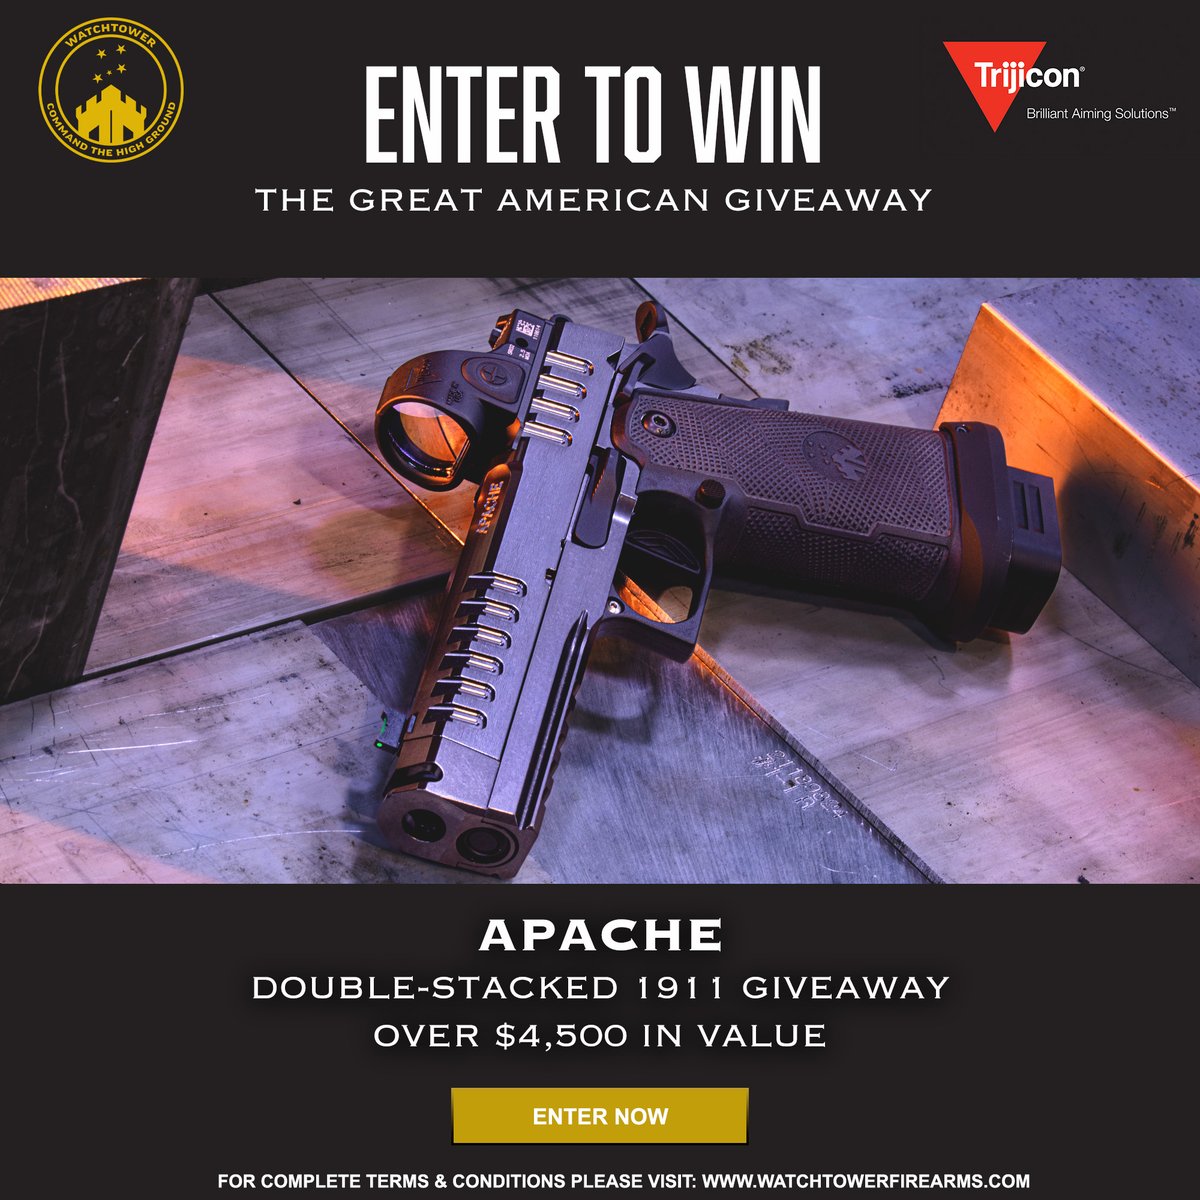 An SRO and APACHE for free? We partnered with Watchtower to give you a chance to win this setup. Enter the giveaway here: form.jotform.com/240944778156064 @WATCHTOWER_USA #SRO #Trijicon #NRA #WatchtowerFirearms